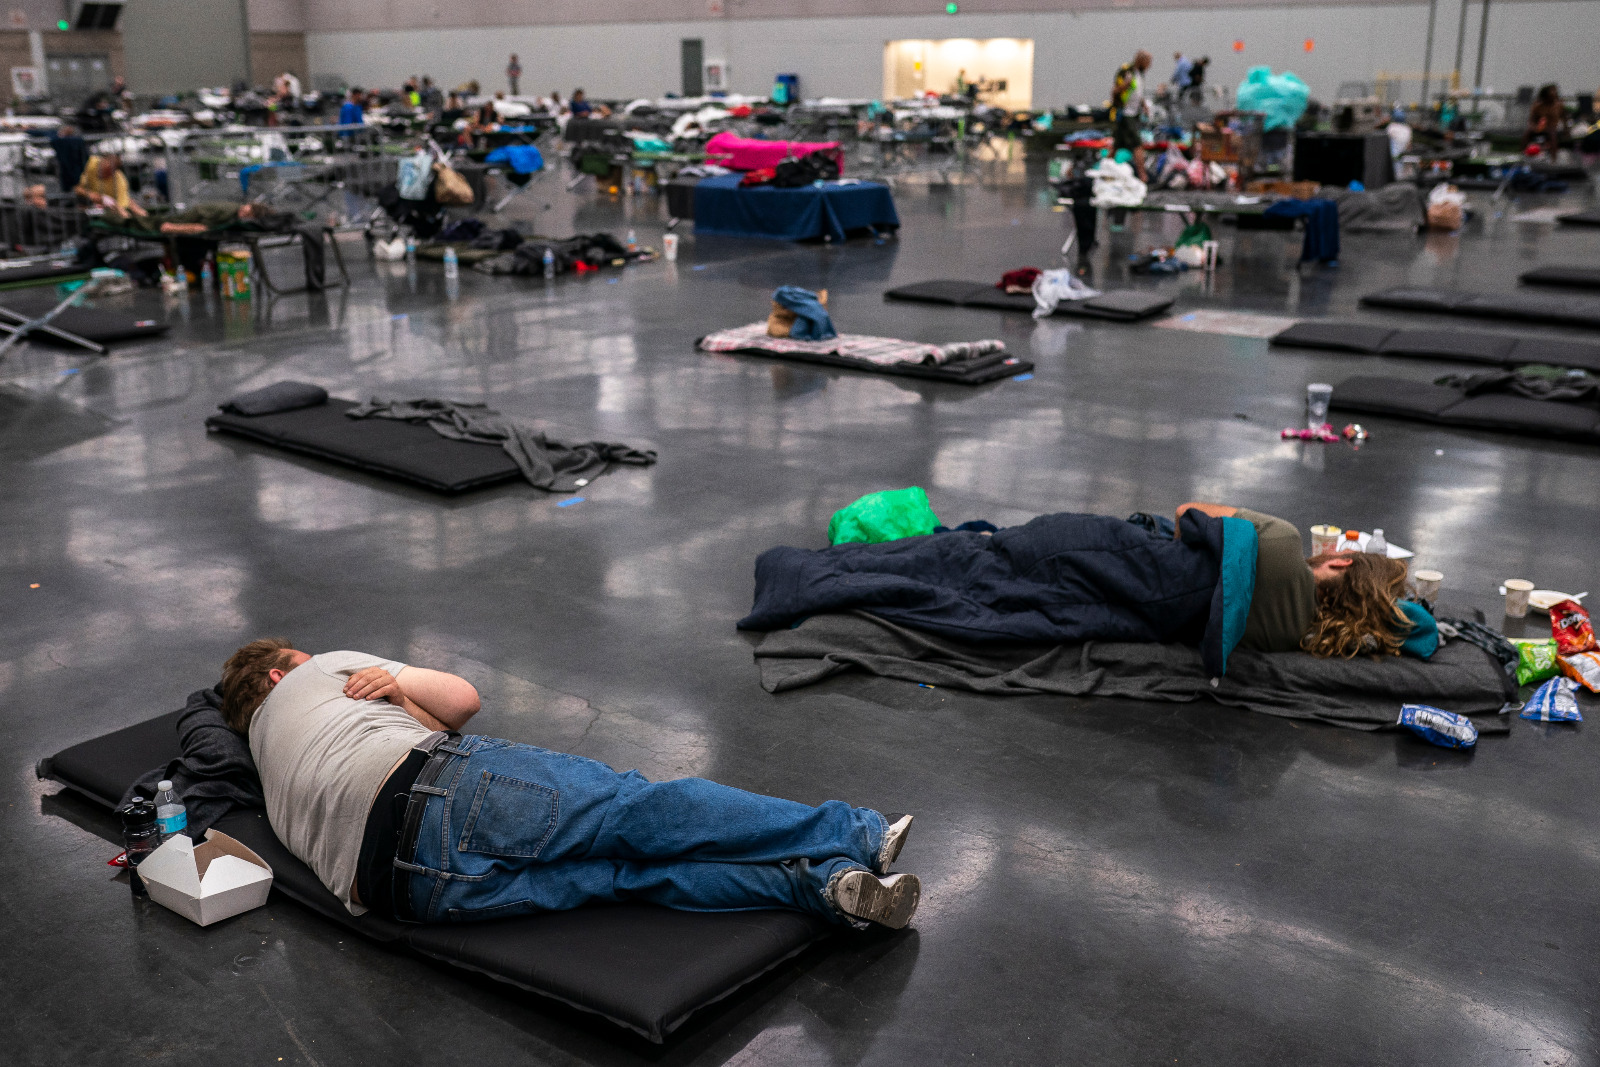 Photo of people lying down on mats on the floor of a large room